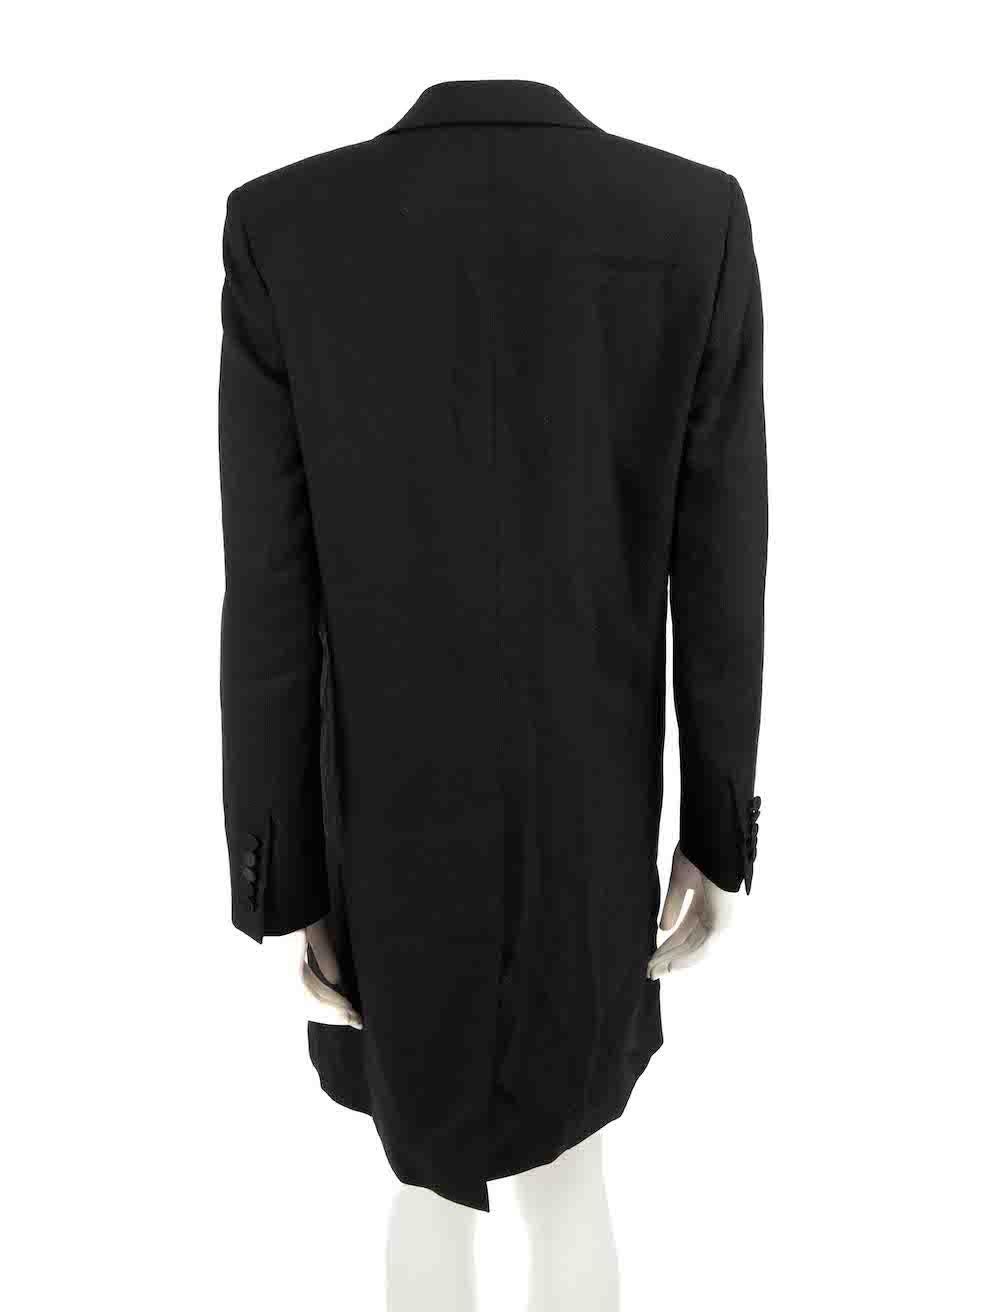 Saint Laurent Black Wool Mid-Length Blazer Coat Size M In Excellent Condition For Sale In London, GB